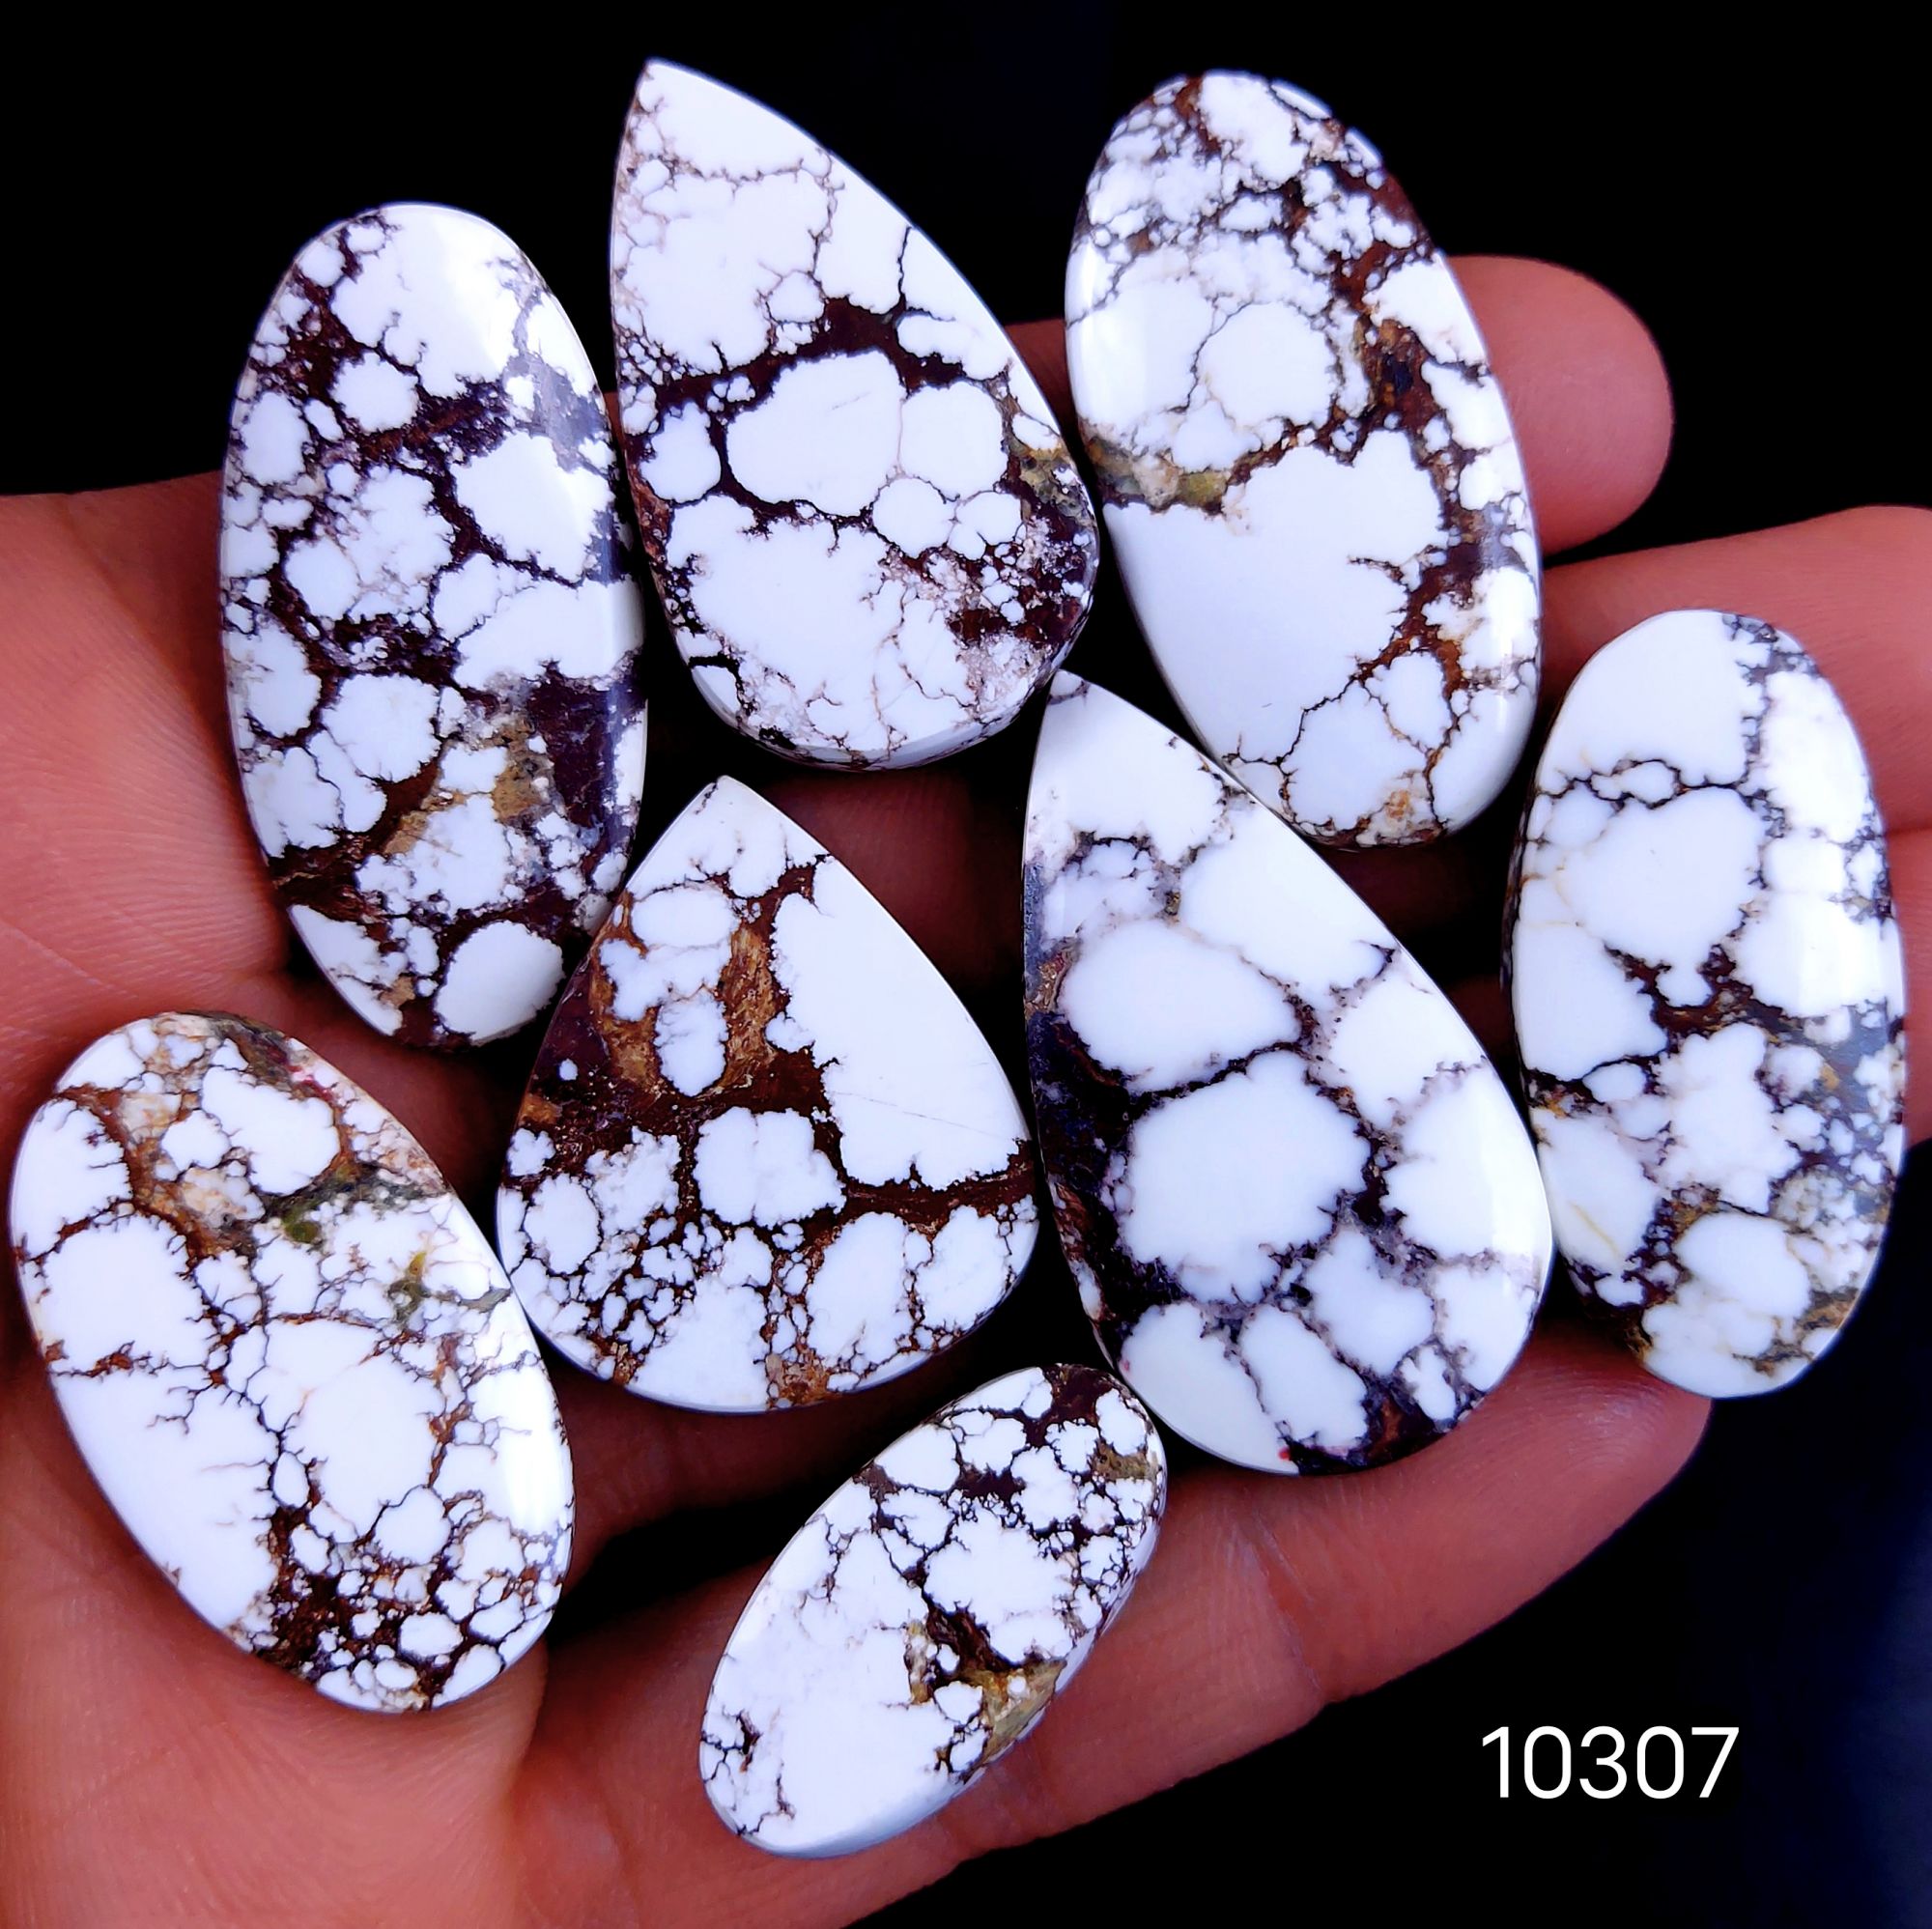 8Pc 299Cts Natural Wild Horse Magnesite Turquoise Cabochon Polished Loose Gemstone Flat Back Multi Jewelry Making Crystal  40x22 26x14mm #10307